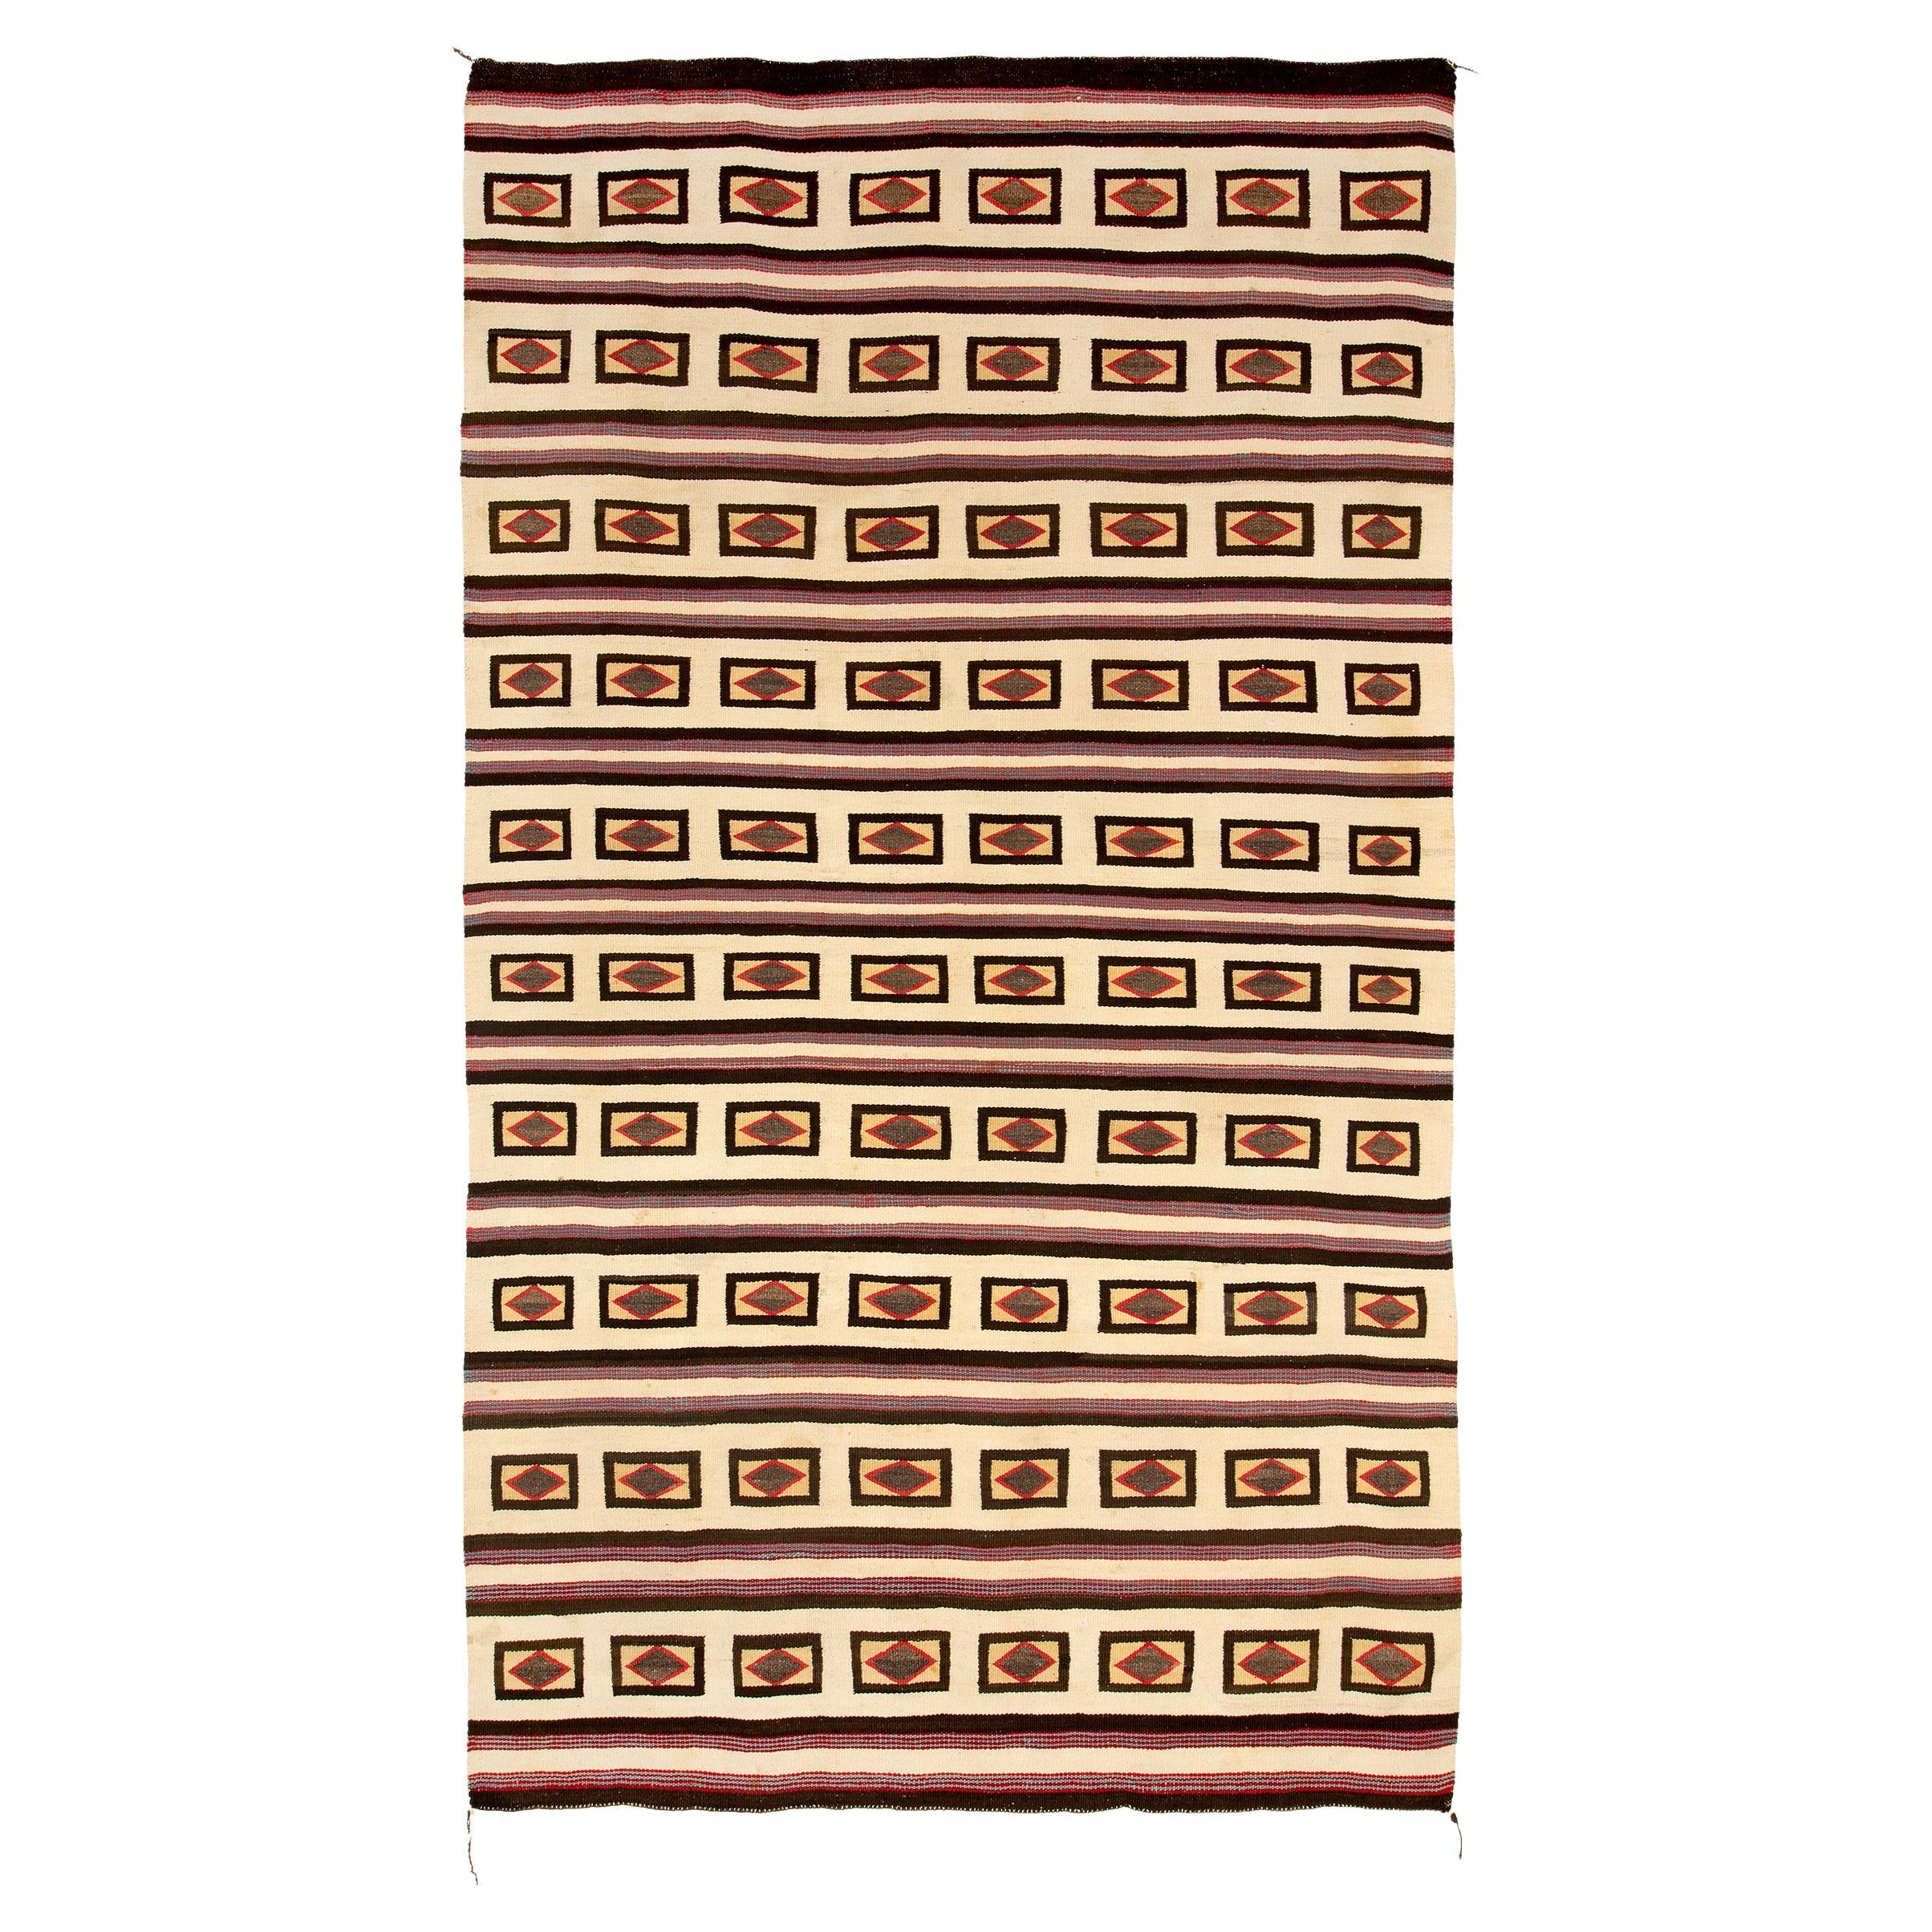 Navajo Rug 1930s, Chinle Stripe & Diamond Pattern Ivory Camel Brown Blue Red For Sale